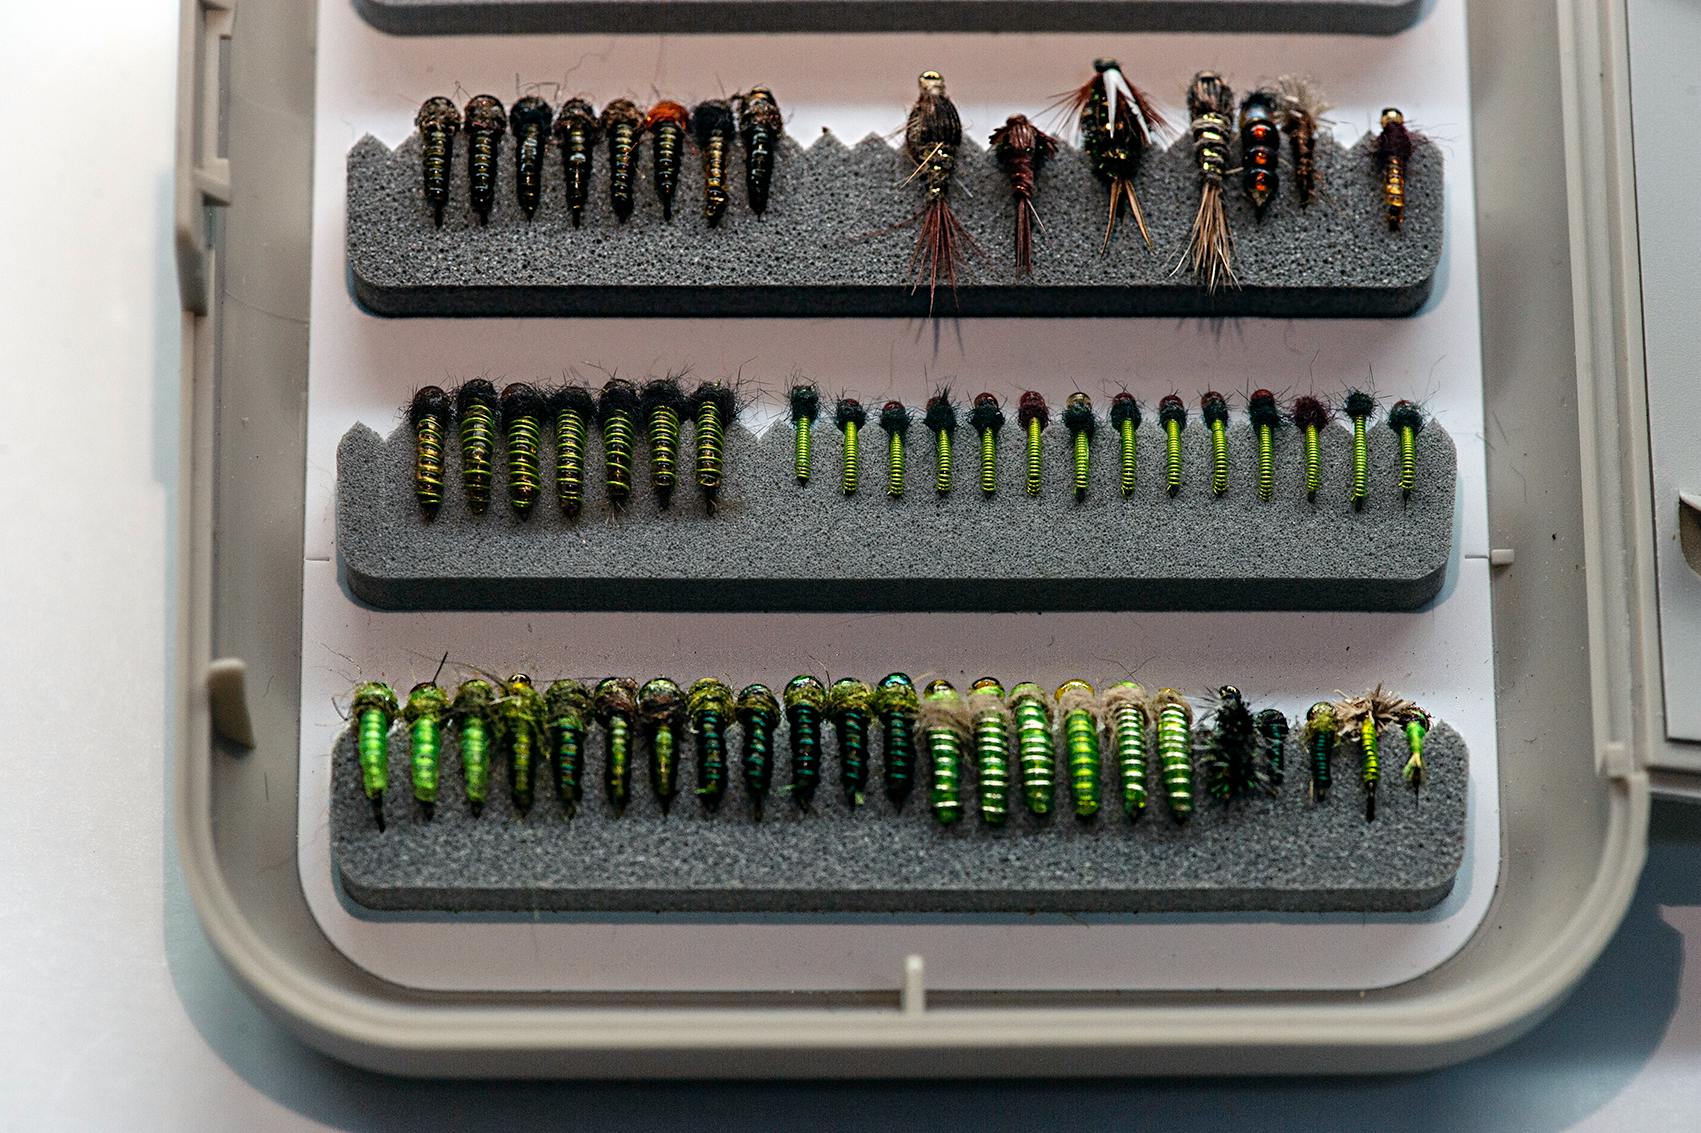 Several different types of flies for fly fishing sit in a fly box. There are three rows with some brown flies, some black flies, and some green flies.